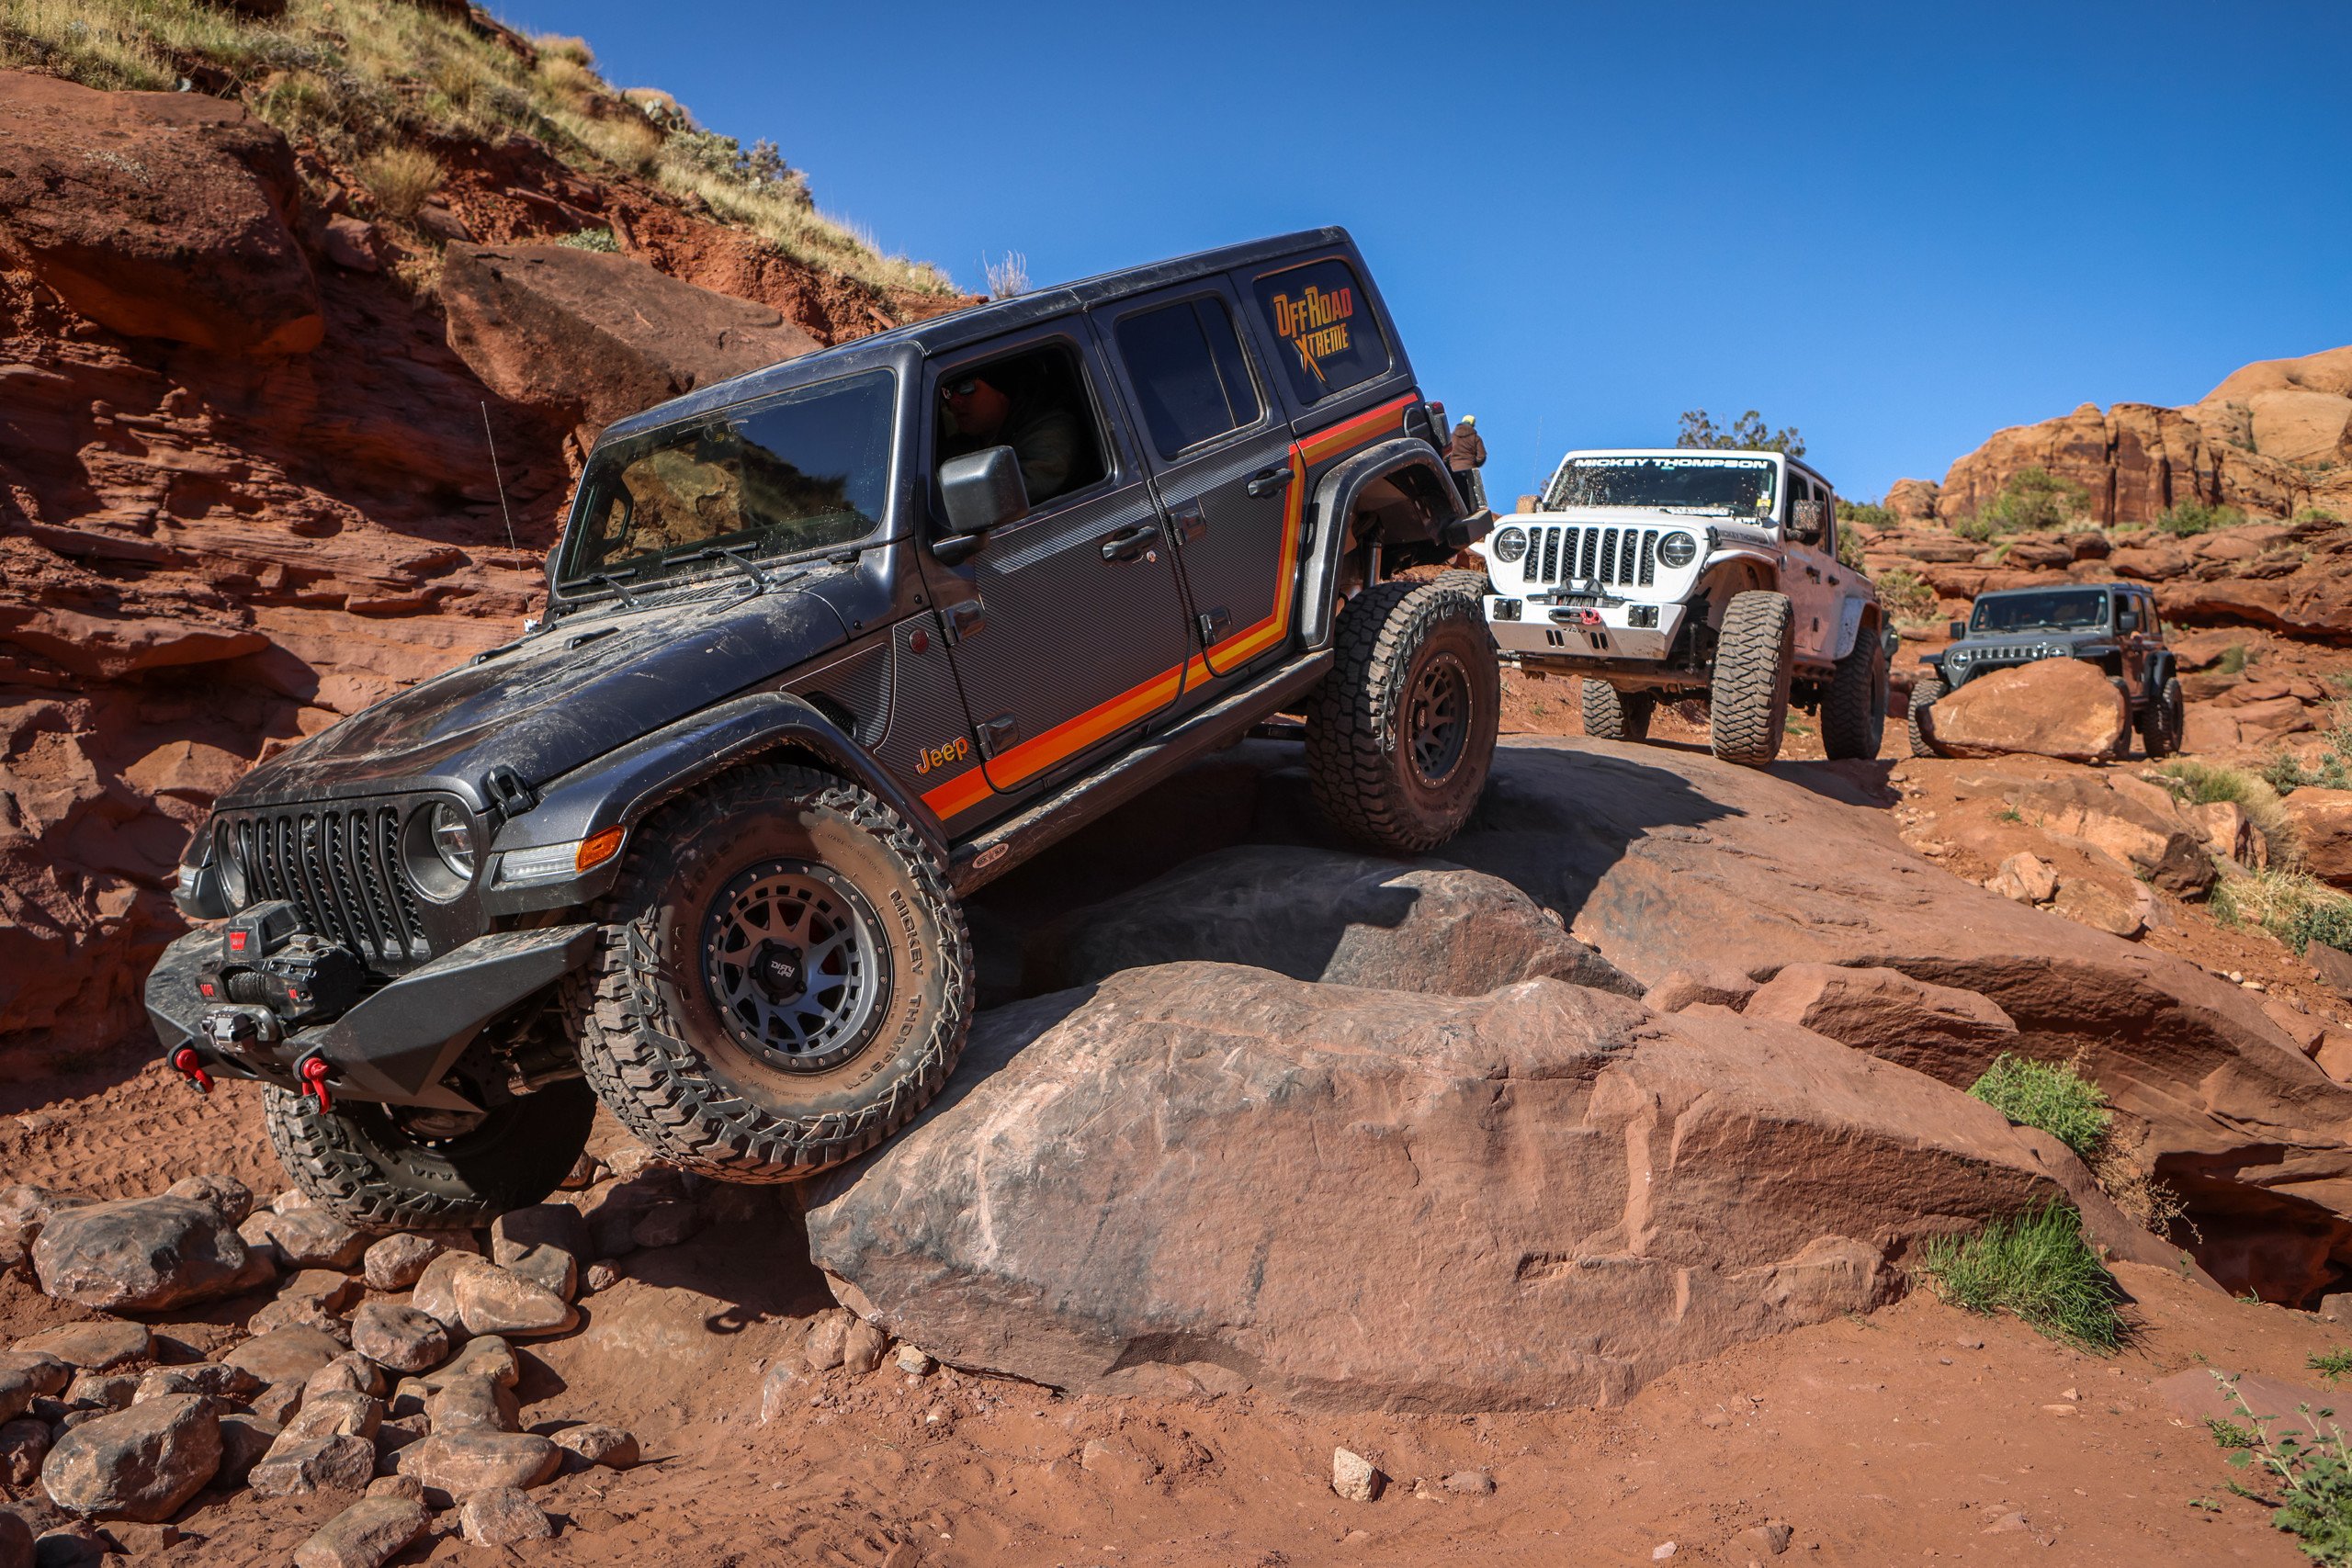 What A Trip! The ORXtreme JL Makes It To Easter Jeep Safari And Back